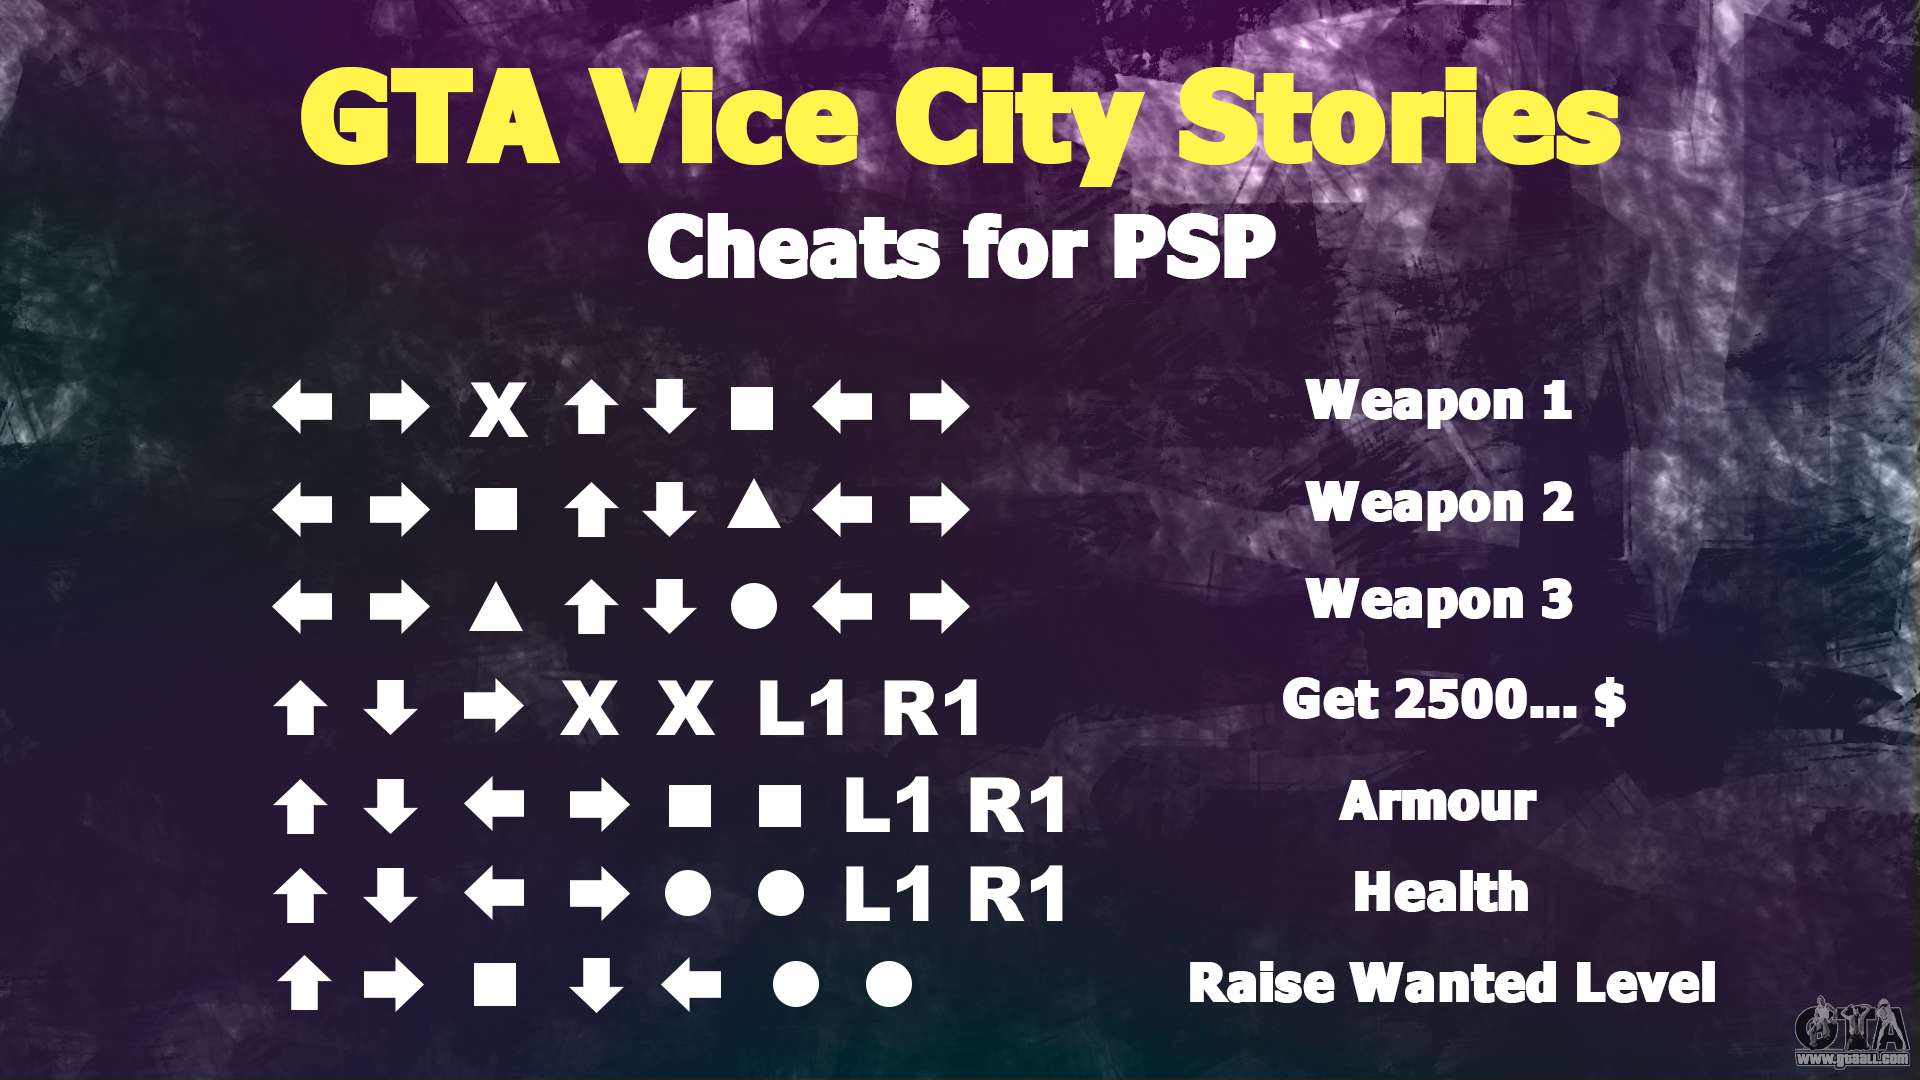 Codes for GTA Vice City Stories for PSP